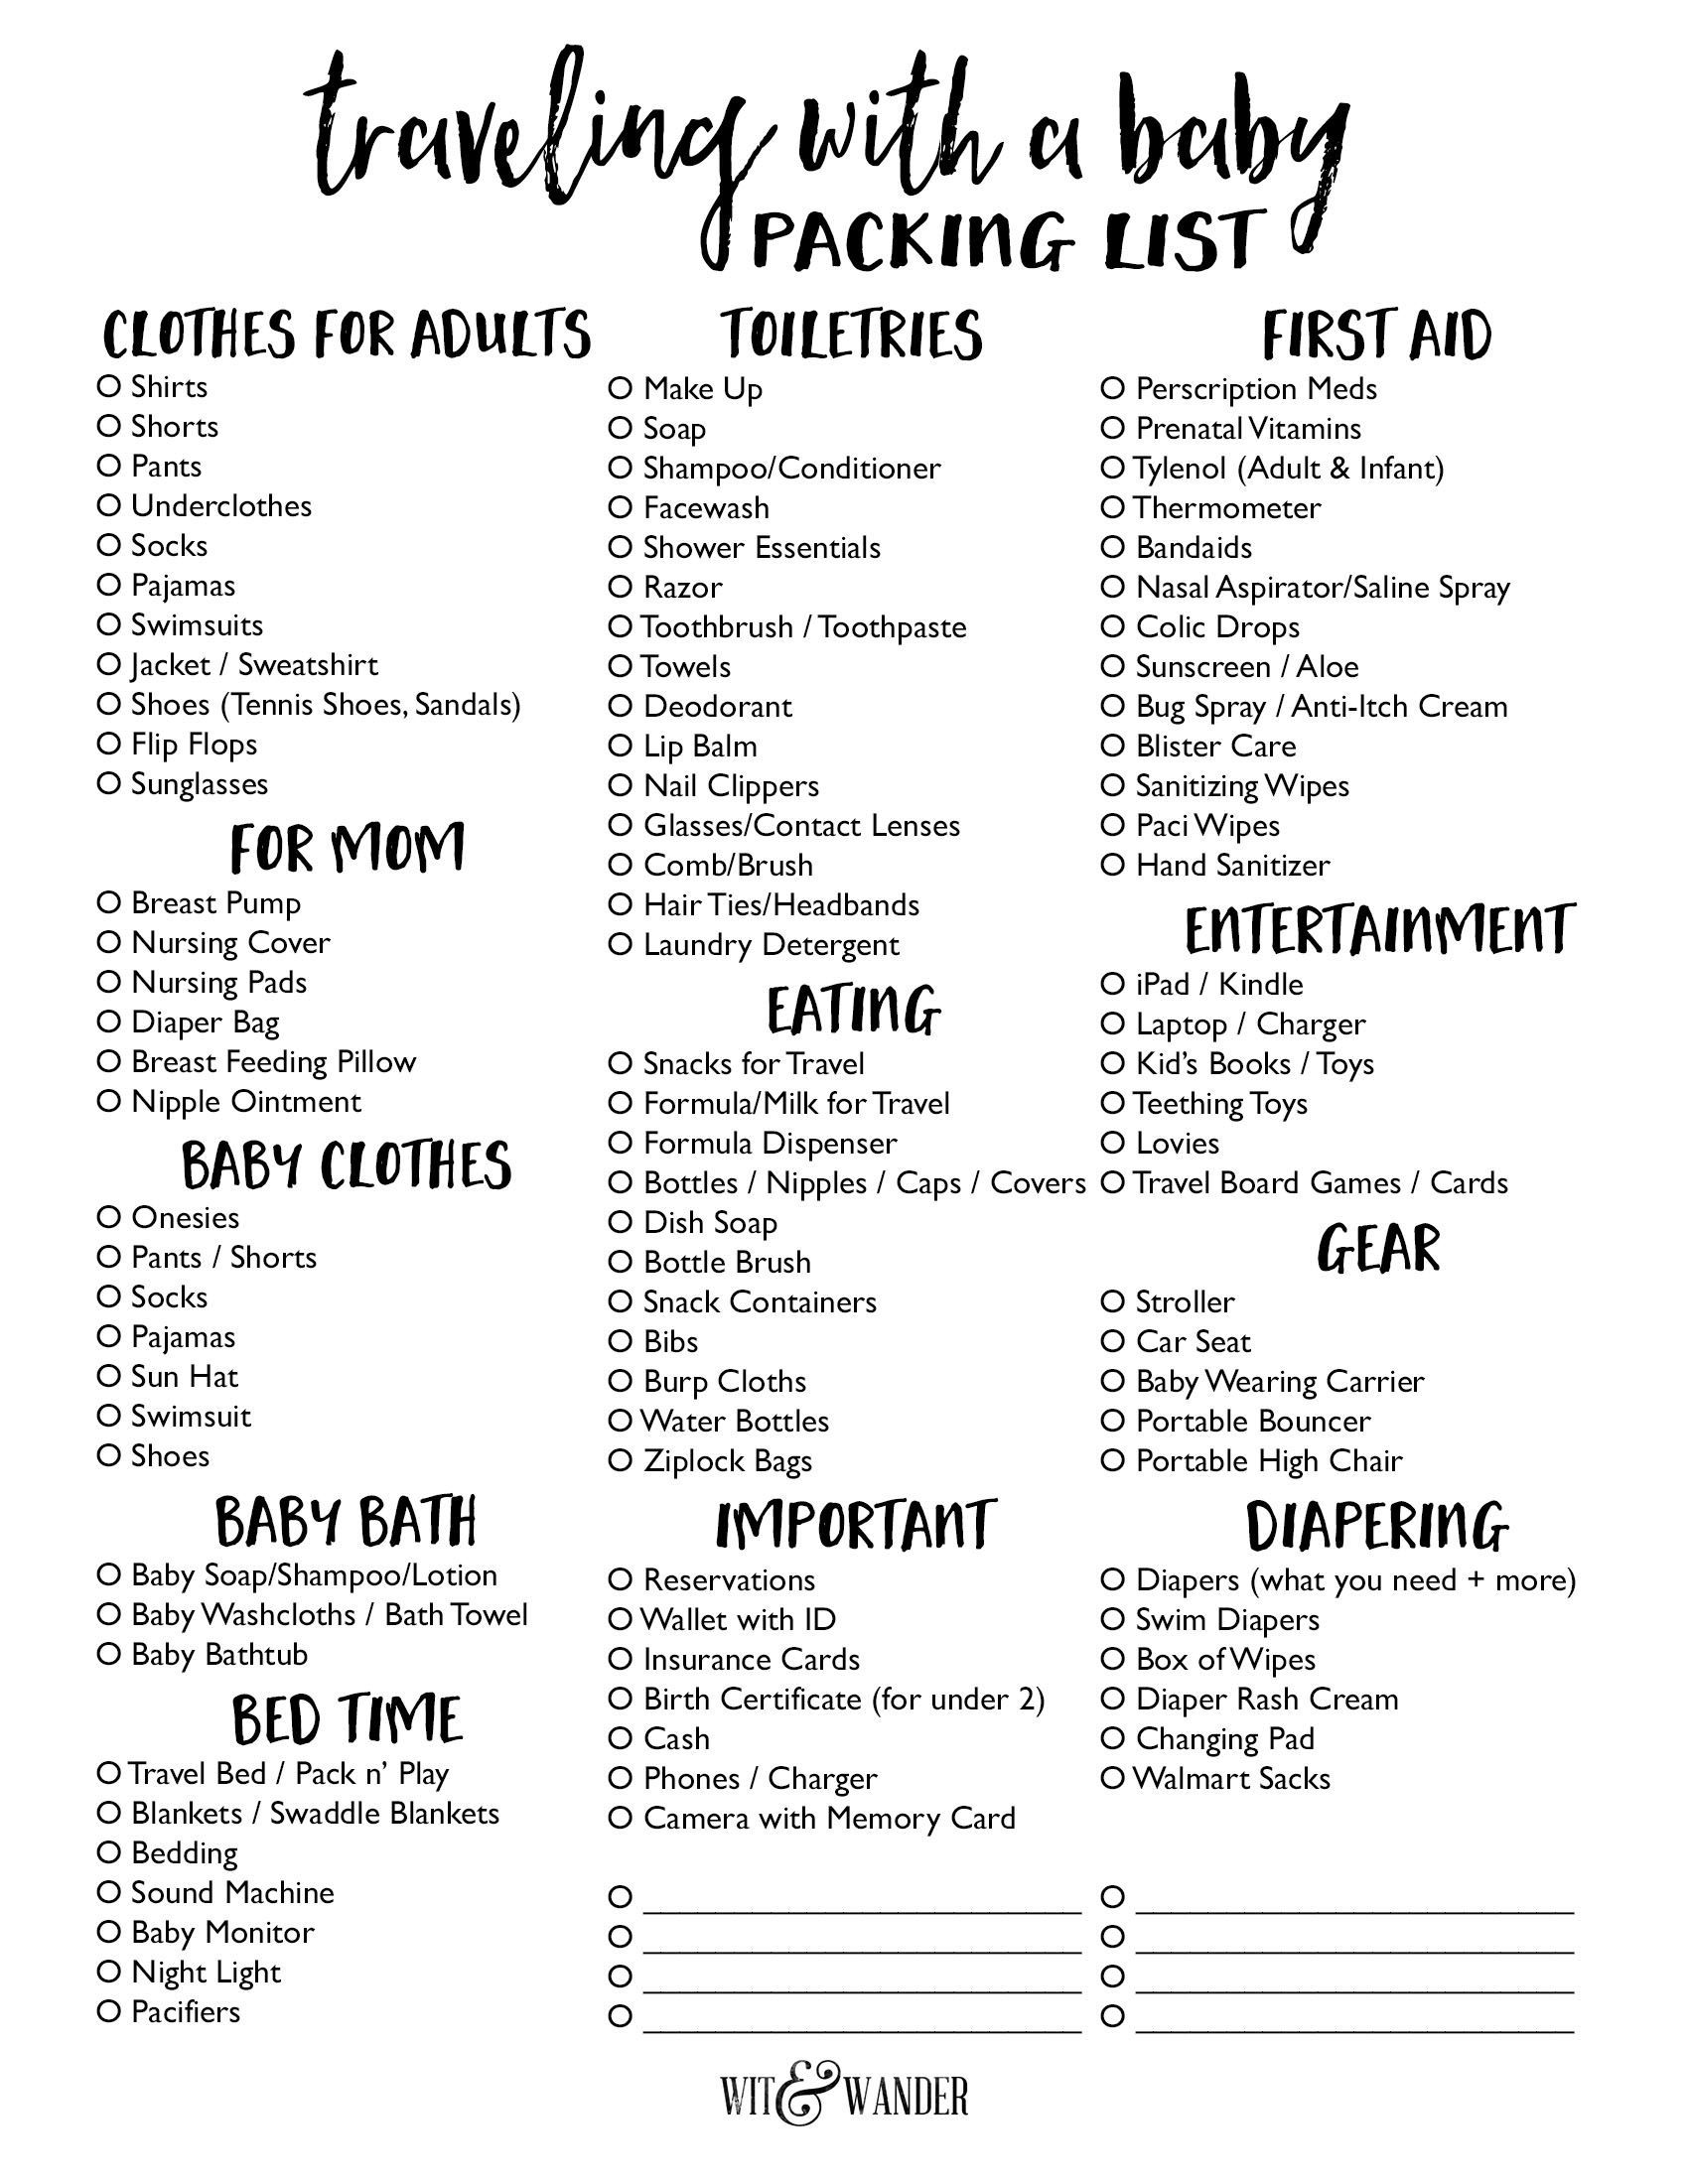 Packing List for Traveling with a Baby - Our Handcrafted Life -   14 holiday Checklist baby ideas